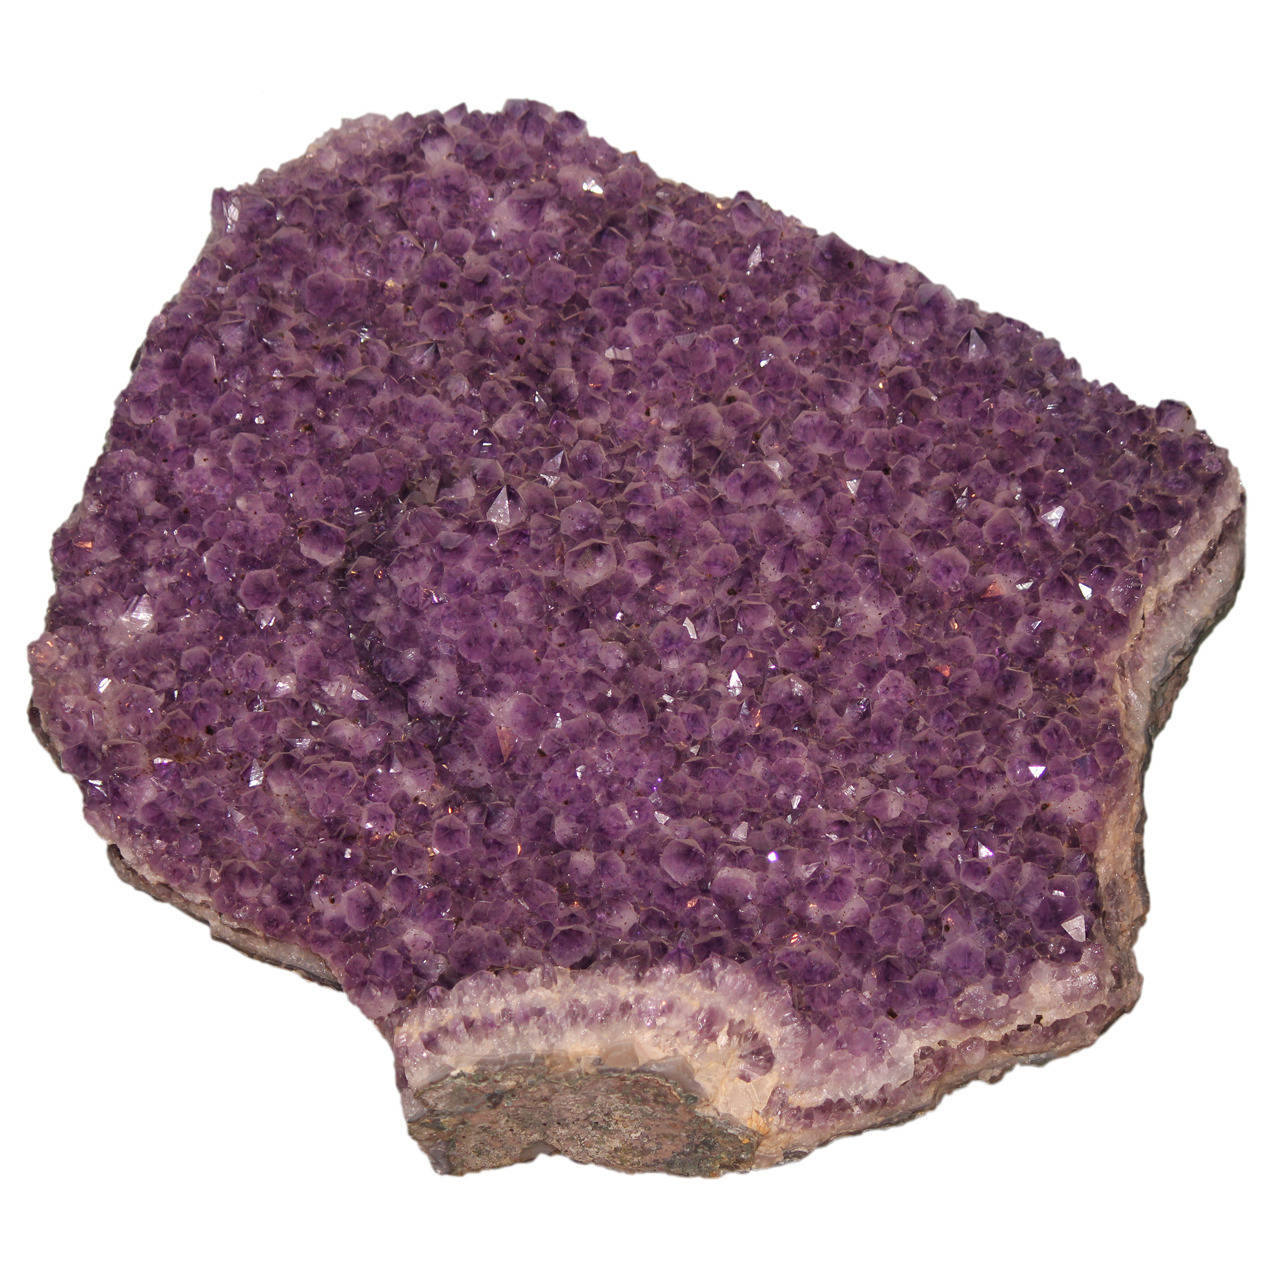 A 1950s lustrous large Brazilian specimen amethyst gem from the Minas Gerais (now closed mine) the finest Brazilian amethyst mine.
This is a beautiful, large A grade specimen amethyst geode from Brazil. It is filled with gorgeous, shiny deep purple